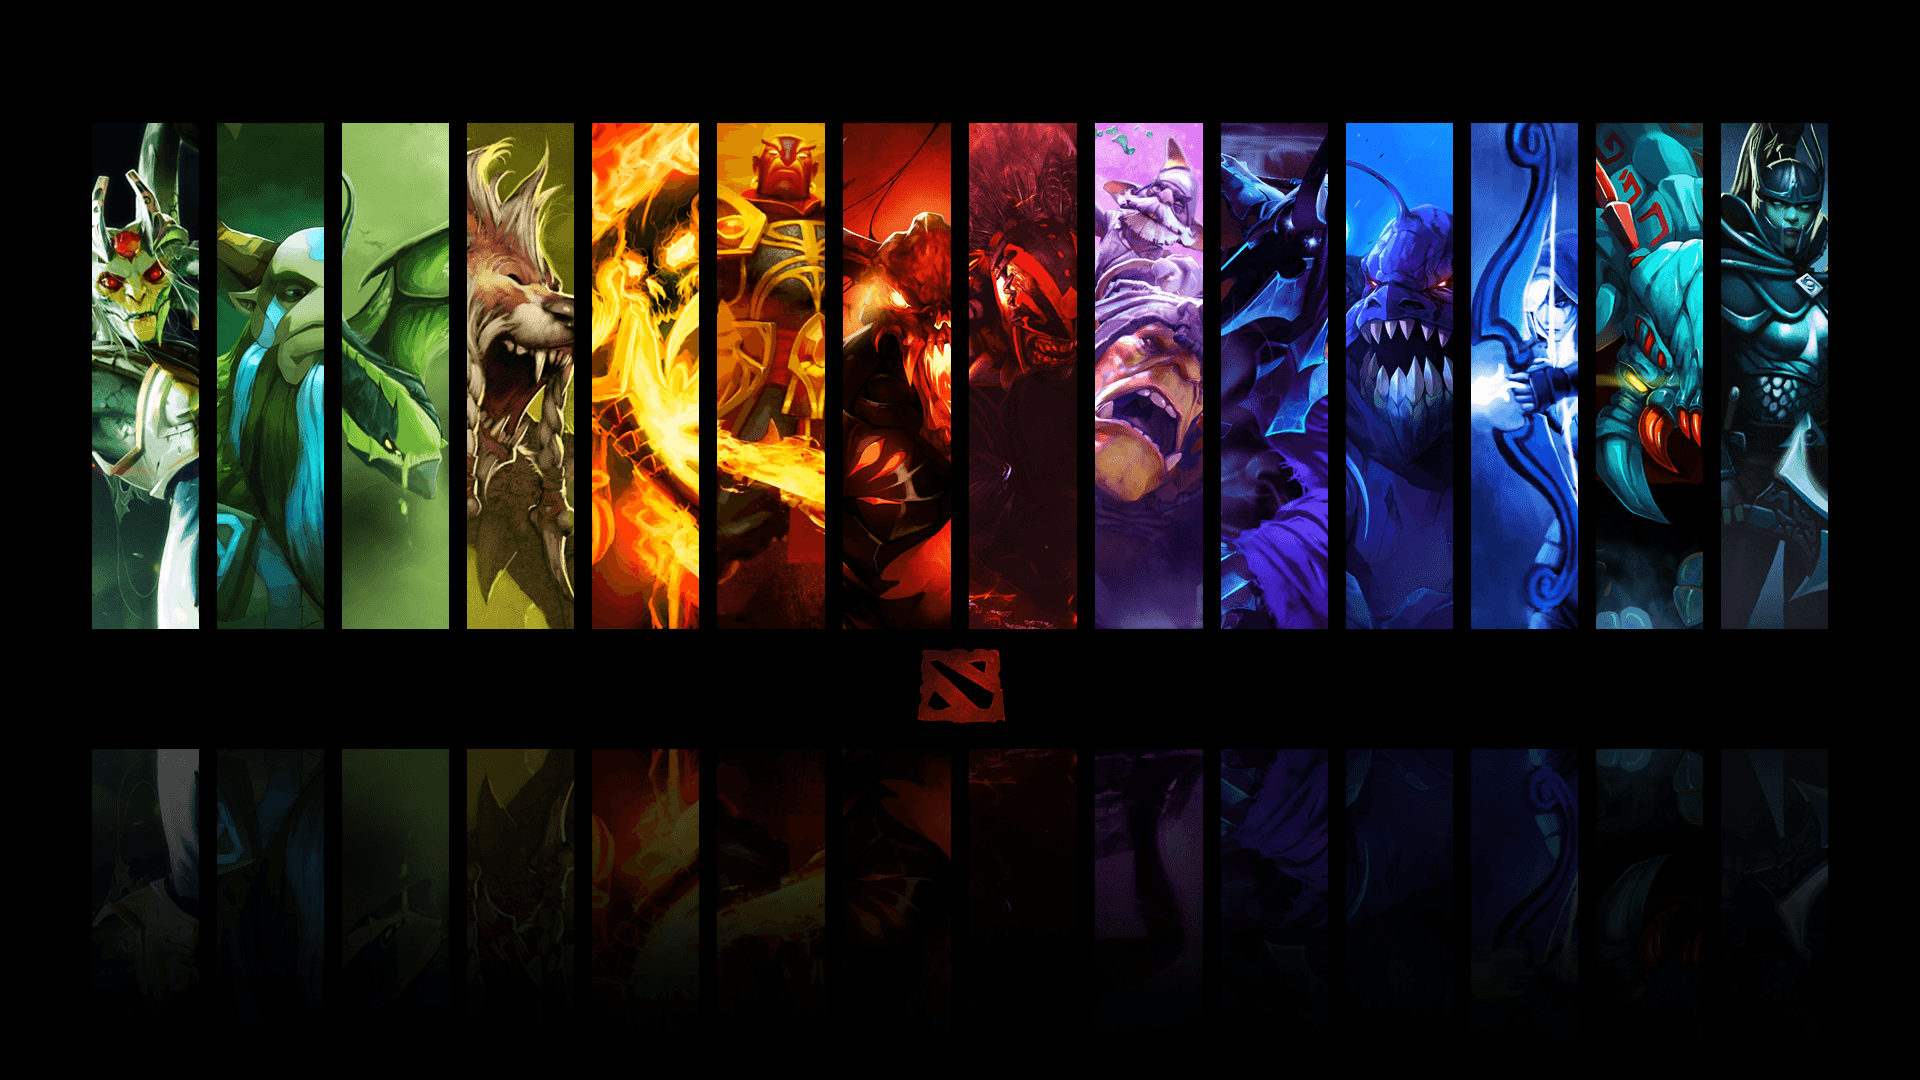 DotA 2 Hero Wallpaper v2: Carries only! [1920x1080] with more